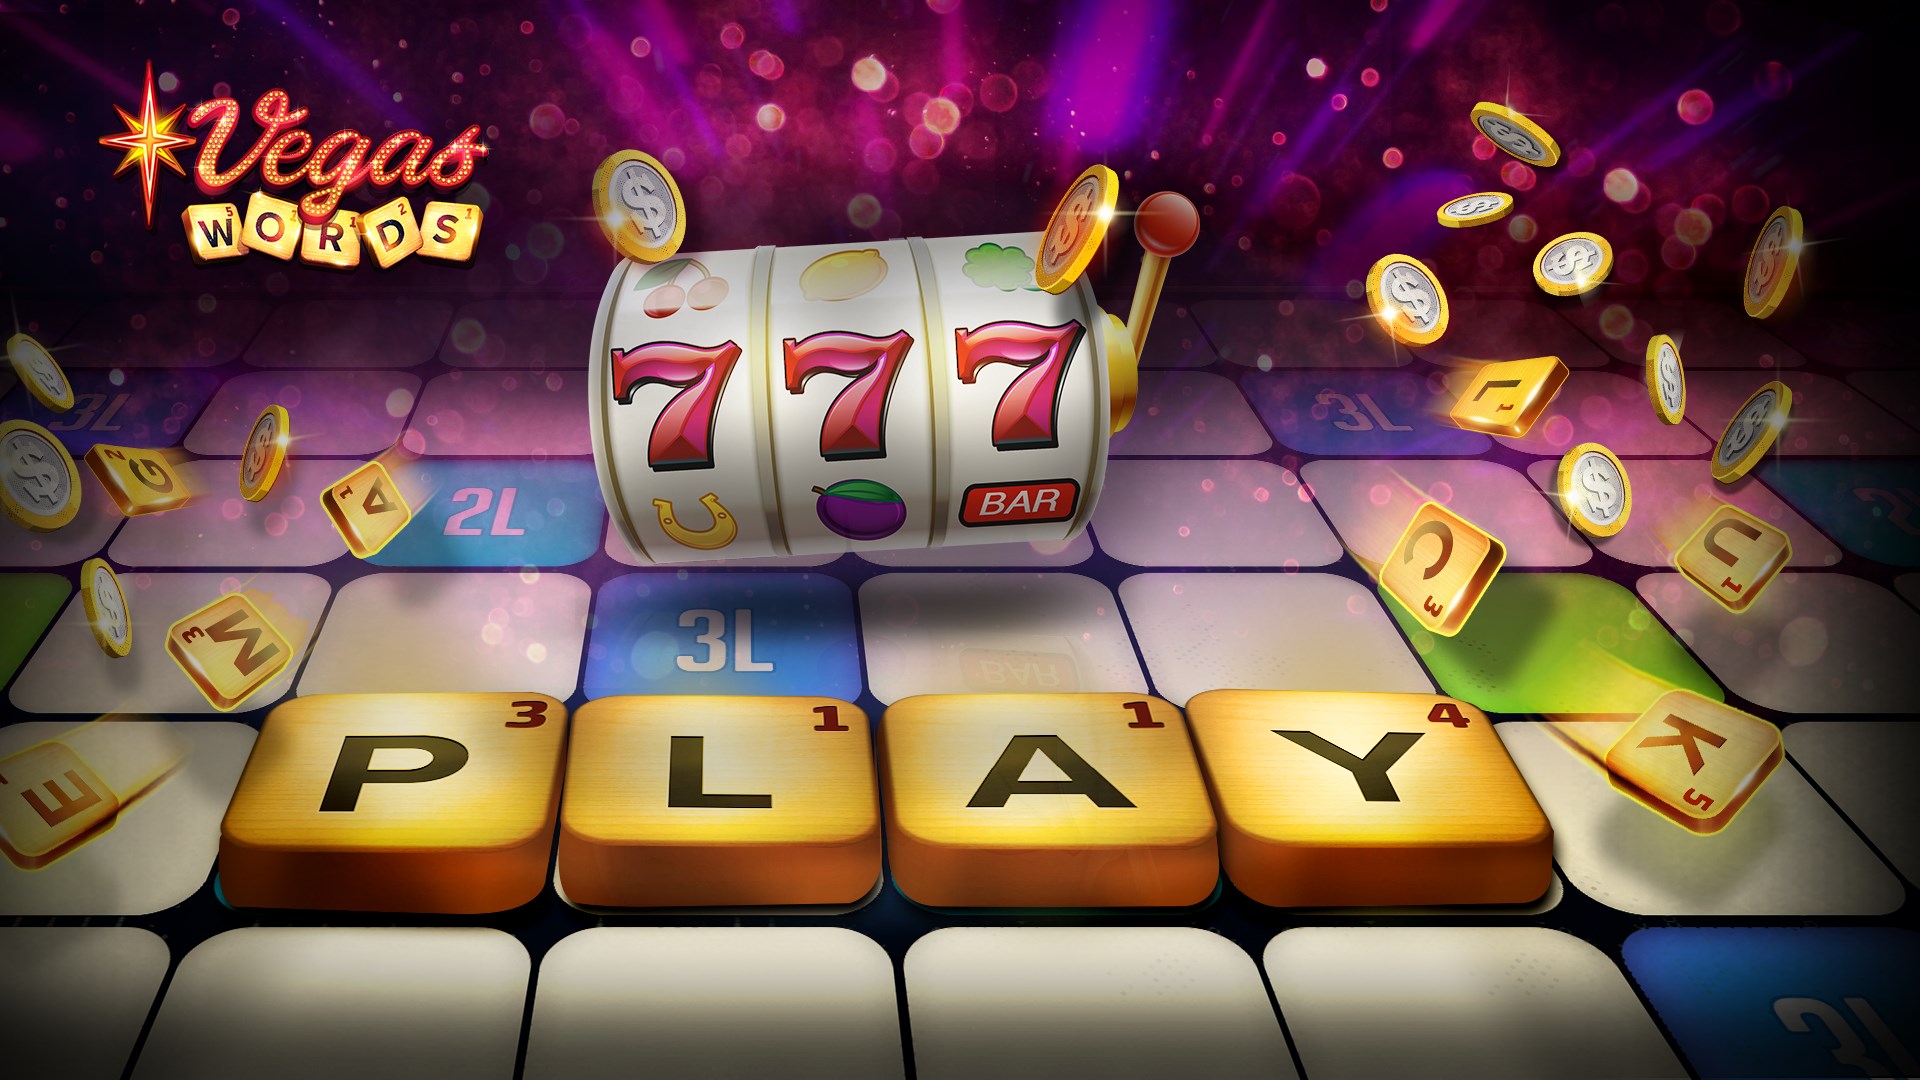 6 Tips that will help you enjoy slot games more - Online Casino GGD